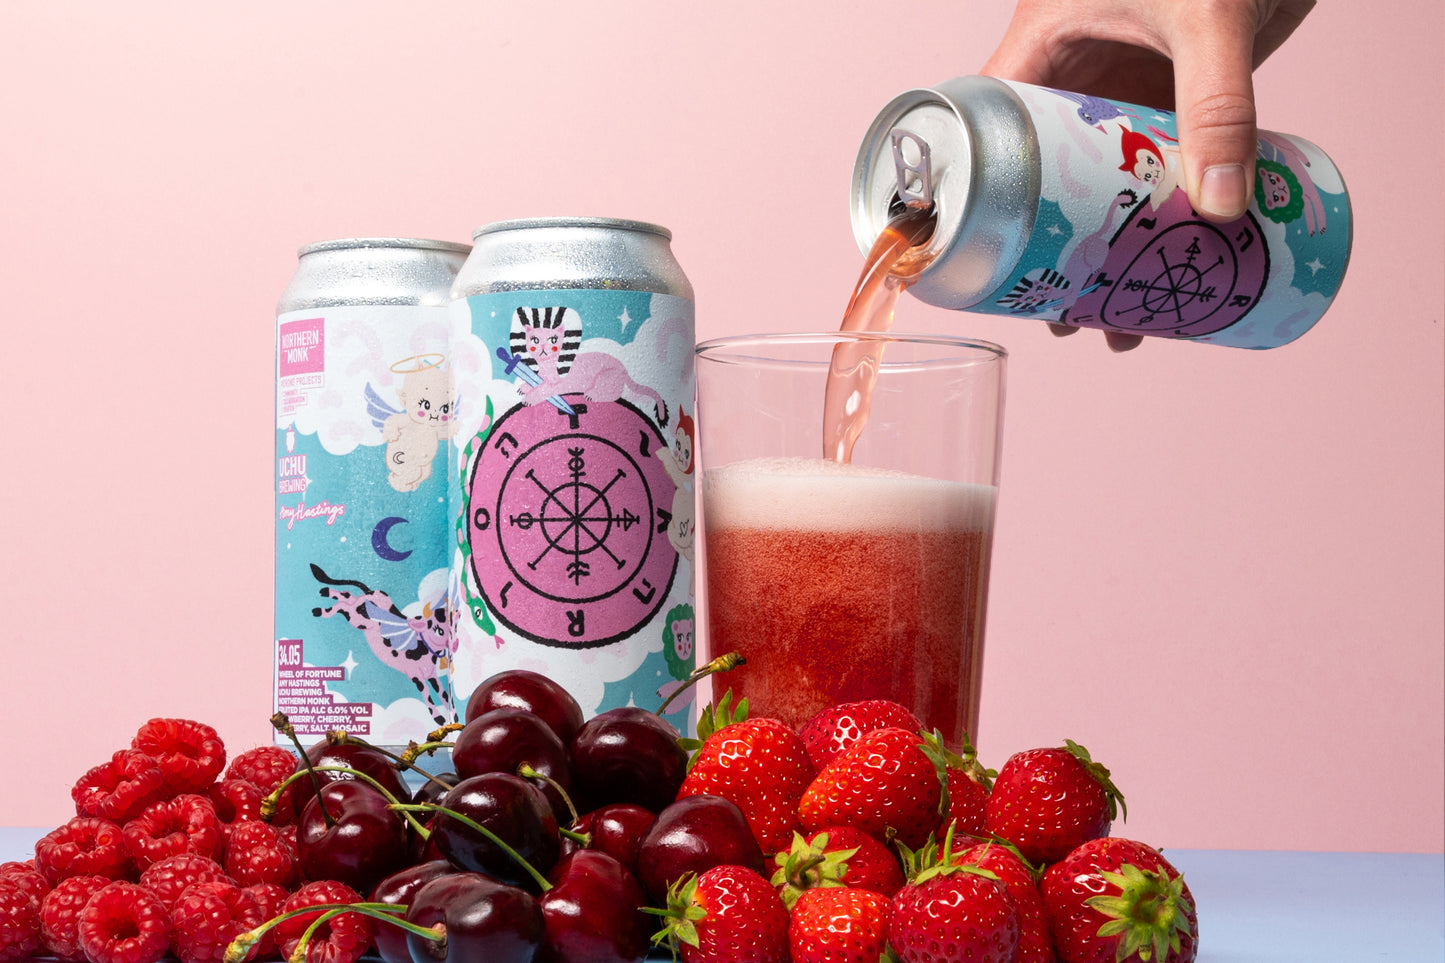 34.05 // AMY HASTINGS // WHEEL OF FORTUNE // UCHU BREWING // SALTED BERRY IPA